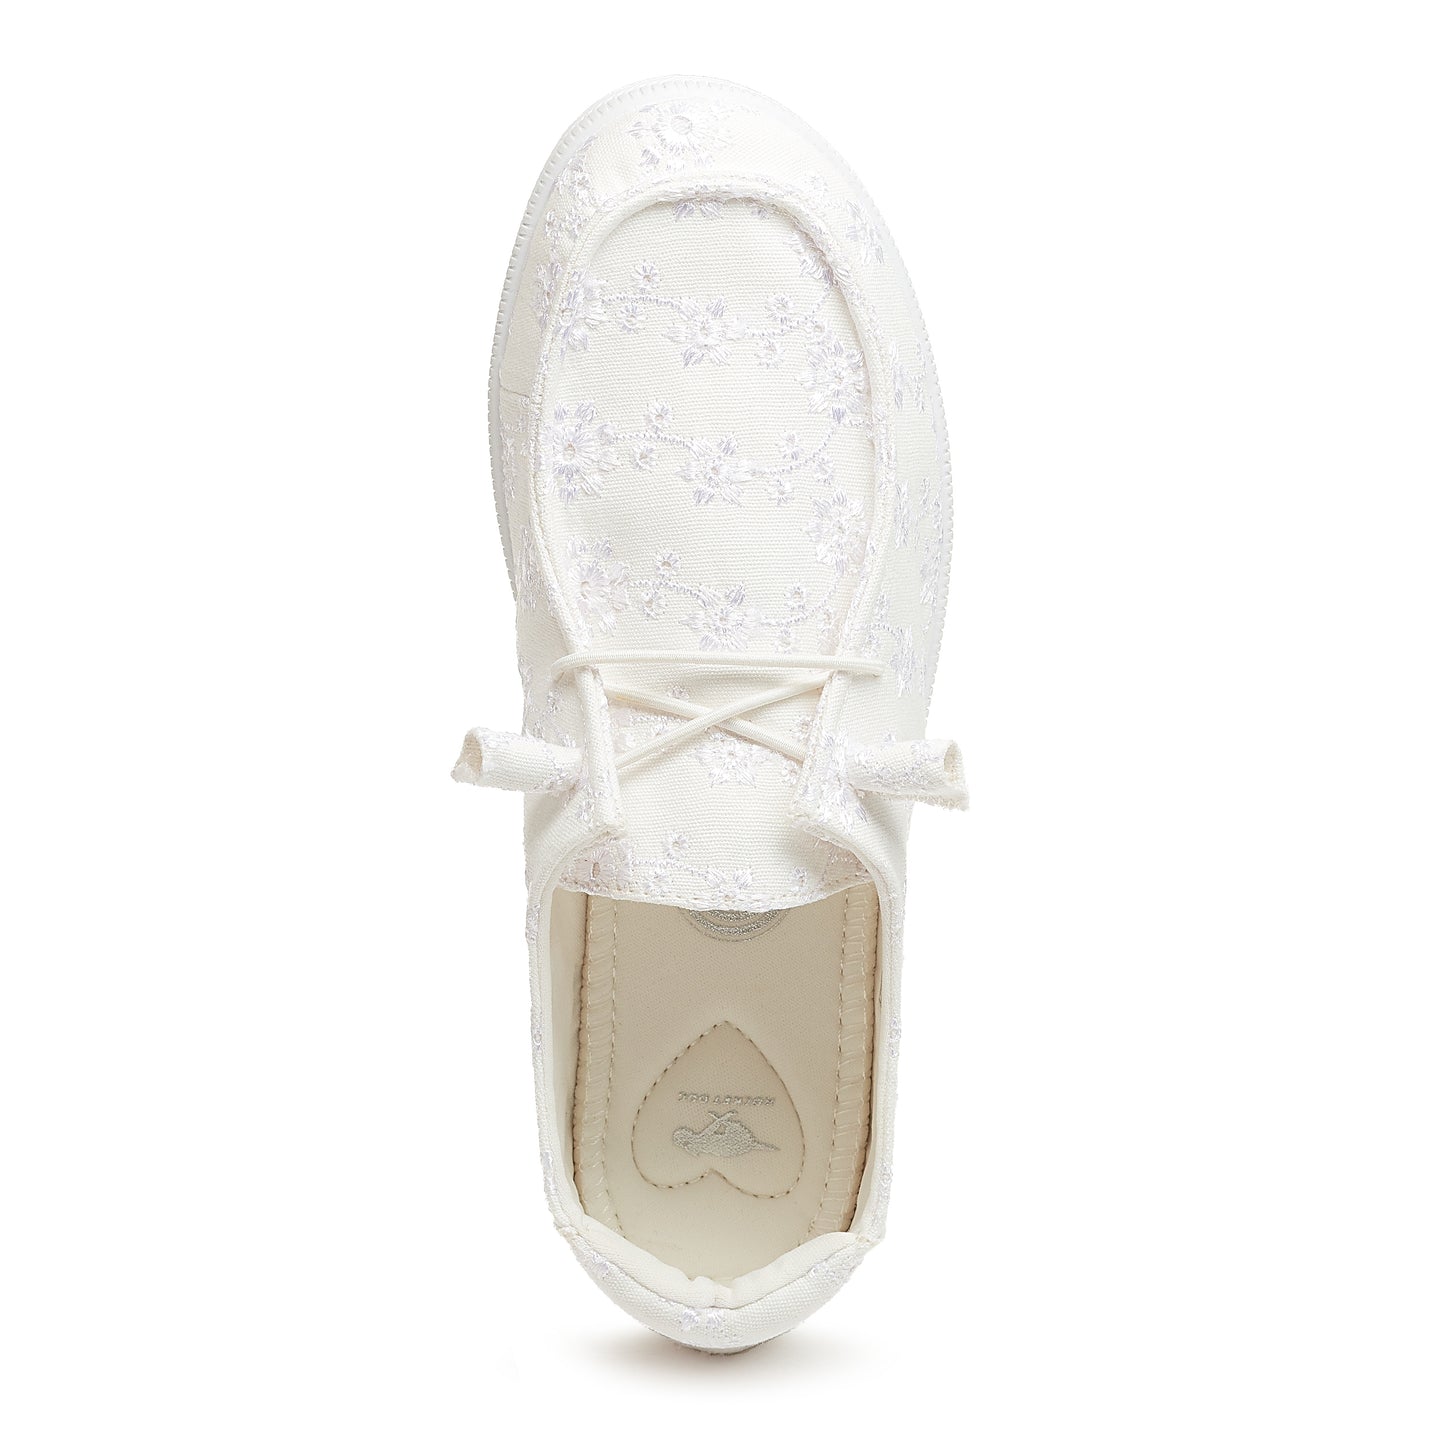 Mellow White Eyelet Slip-On Casual Shoes